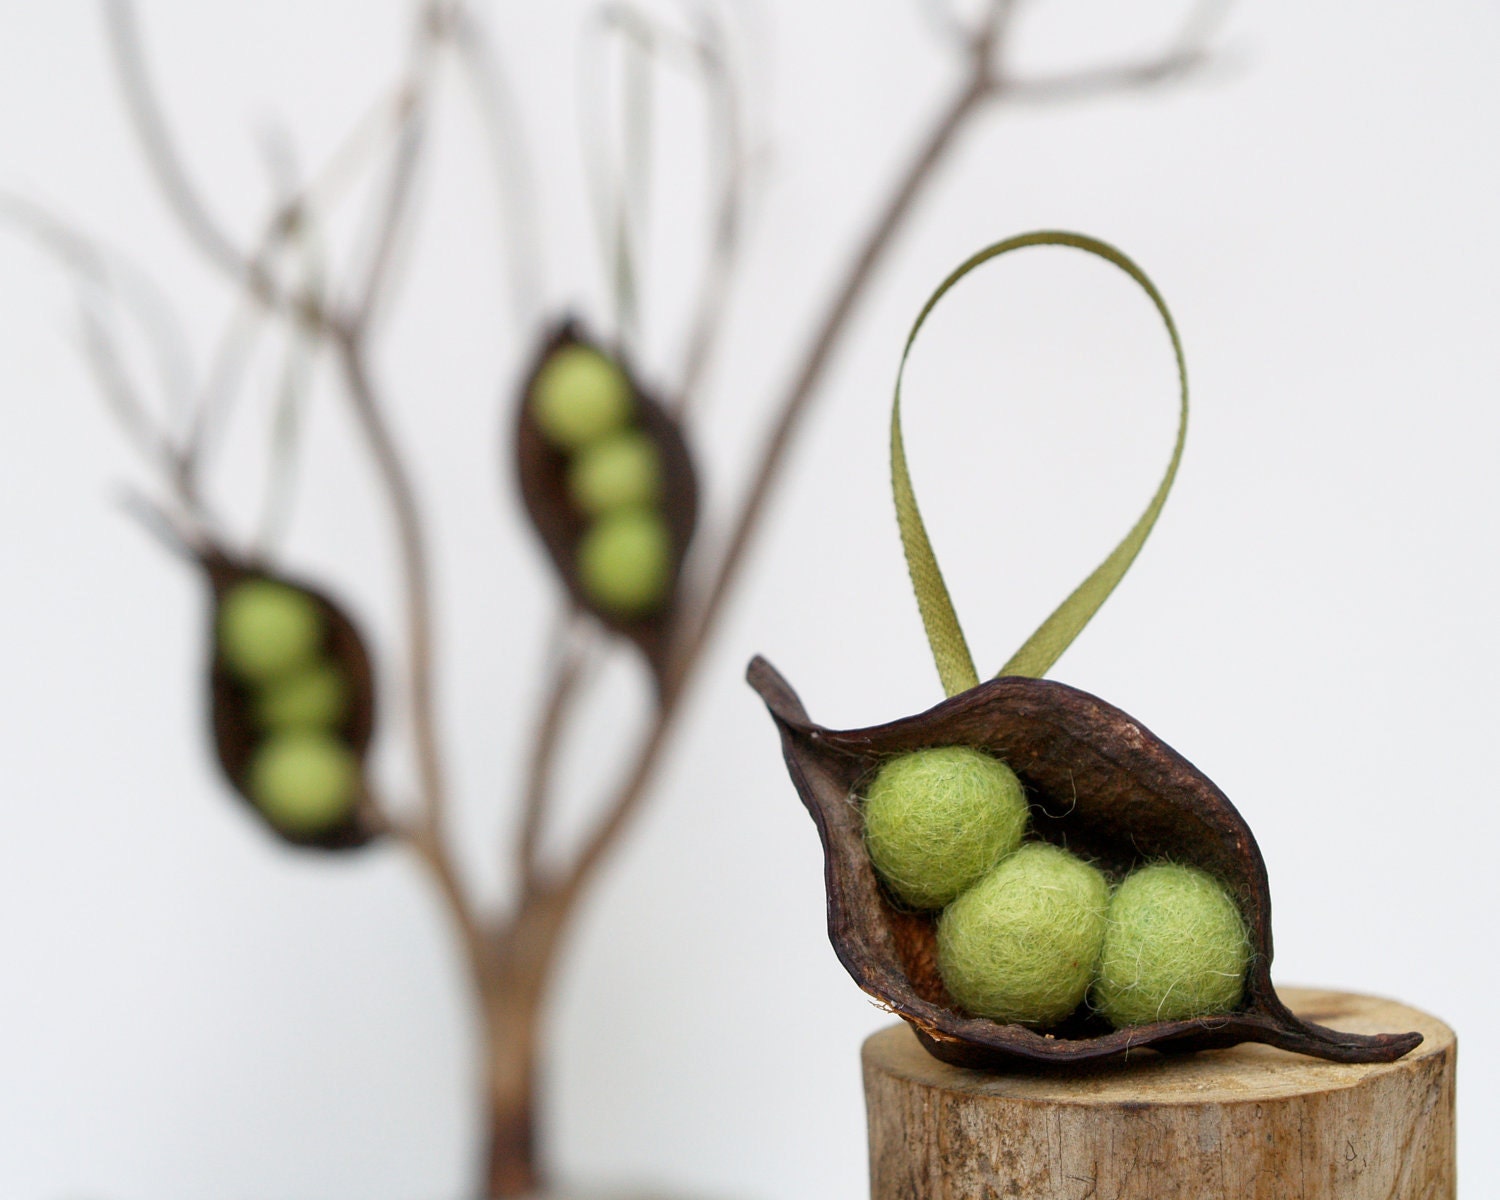 Natural Christmas Ornaments, 3 Pea Pod Decorations Nature Inspired Olive Green Rustic Organic Fun Food Dude Unique Needle Felted Wool Tree - Fairyfolk